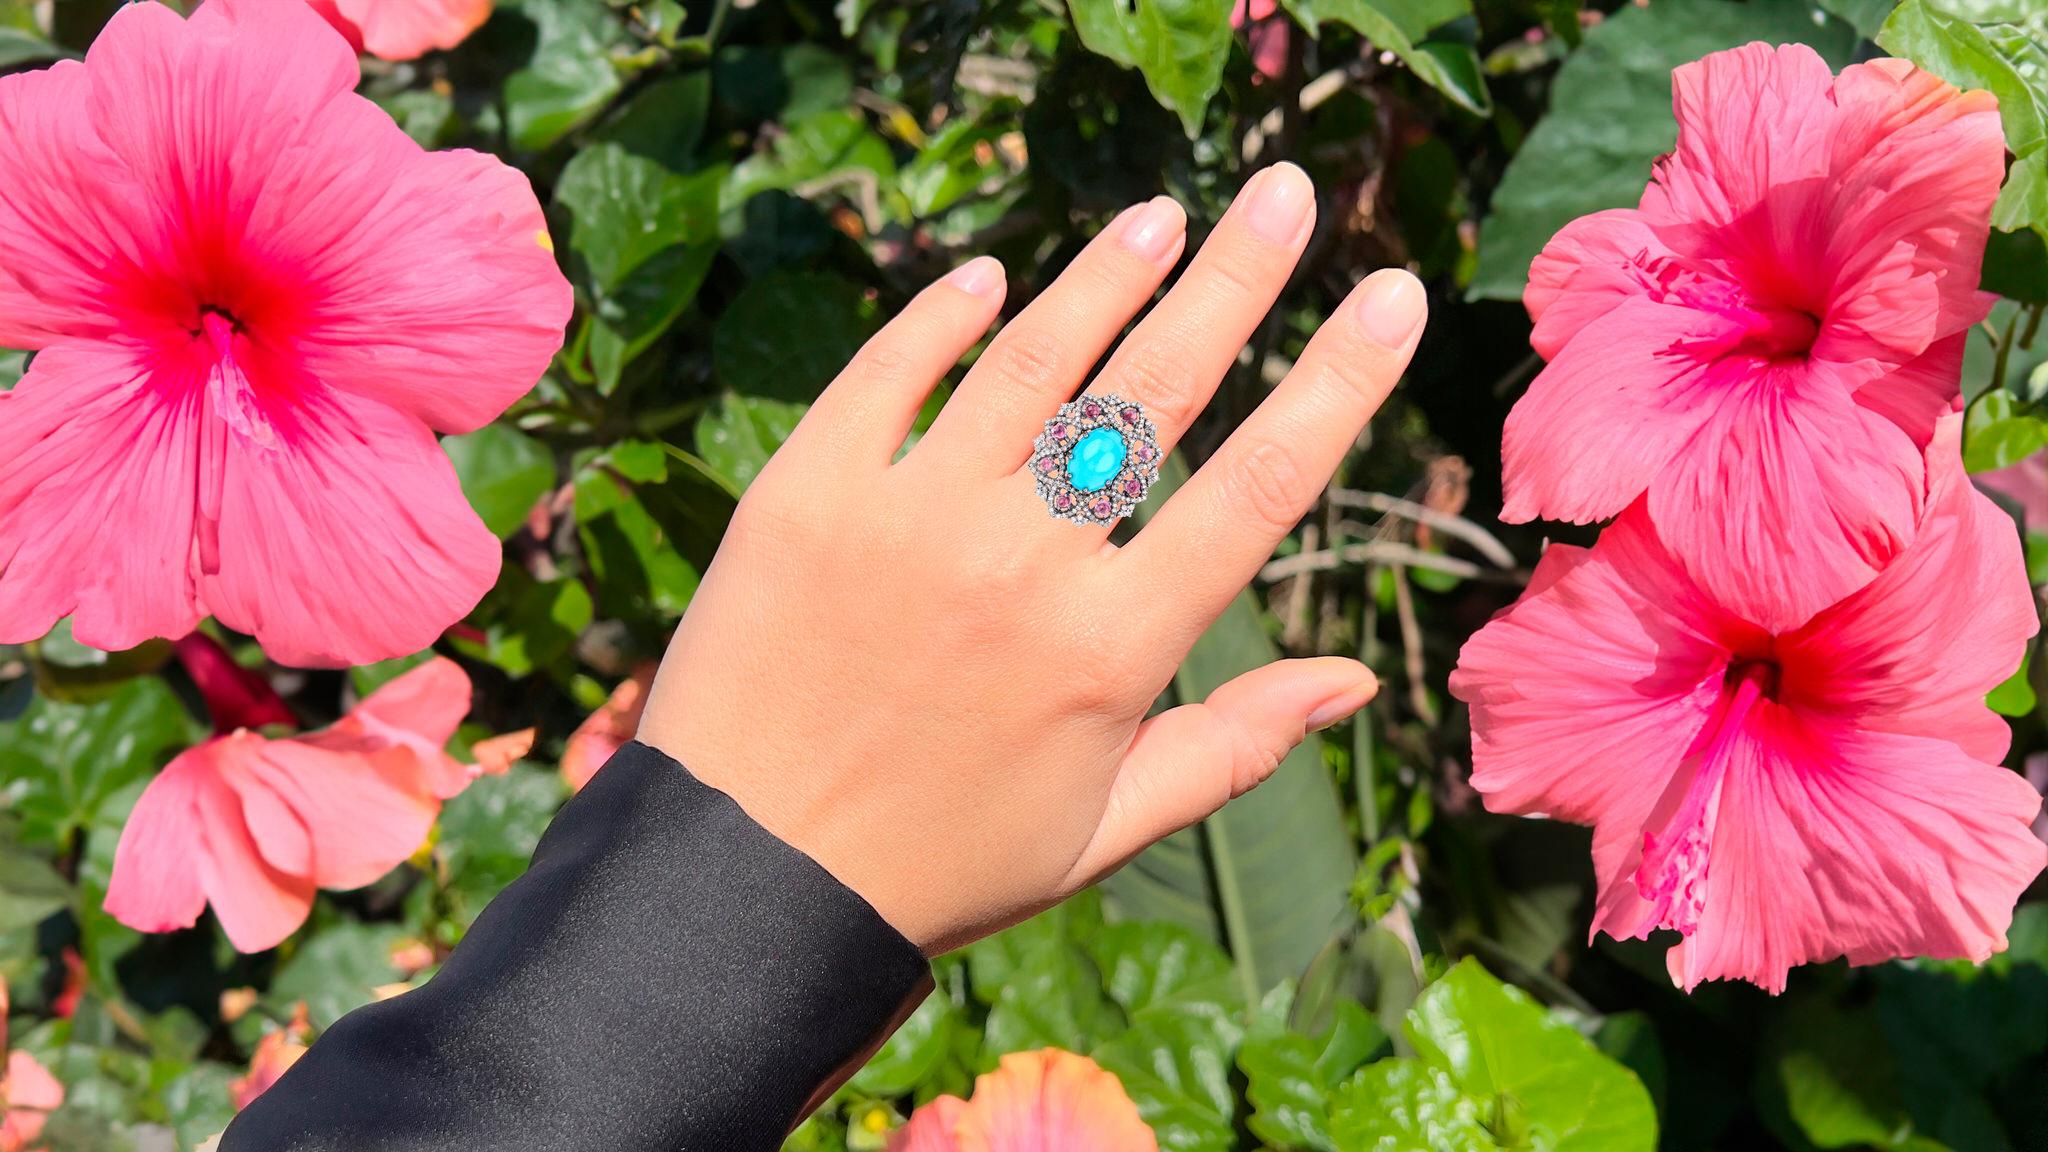 It comes with the Gemological Appraisal by GIA GG/AJP
All Gemstones are Natural
Gemstones: Turquoise, Pink Tourmalines, Diamonds
Total Carat Weight: 7.50 Carats
Metal: Rhodium Plated Sterling Silver
Ring Size: 7.25* US
*It can be resized